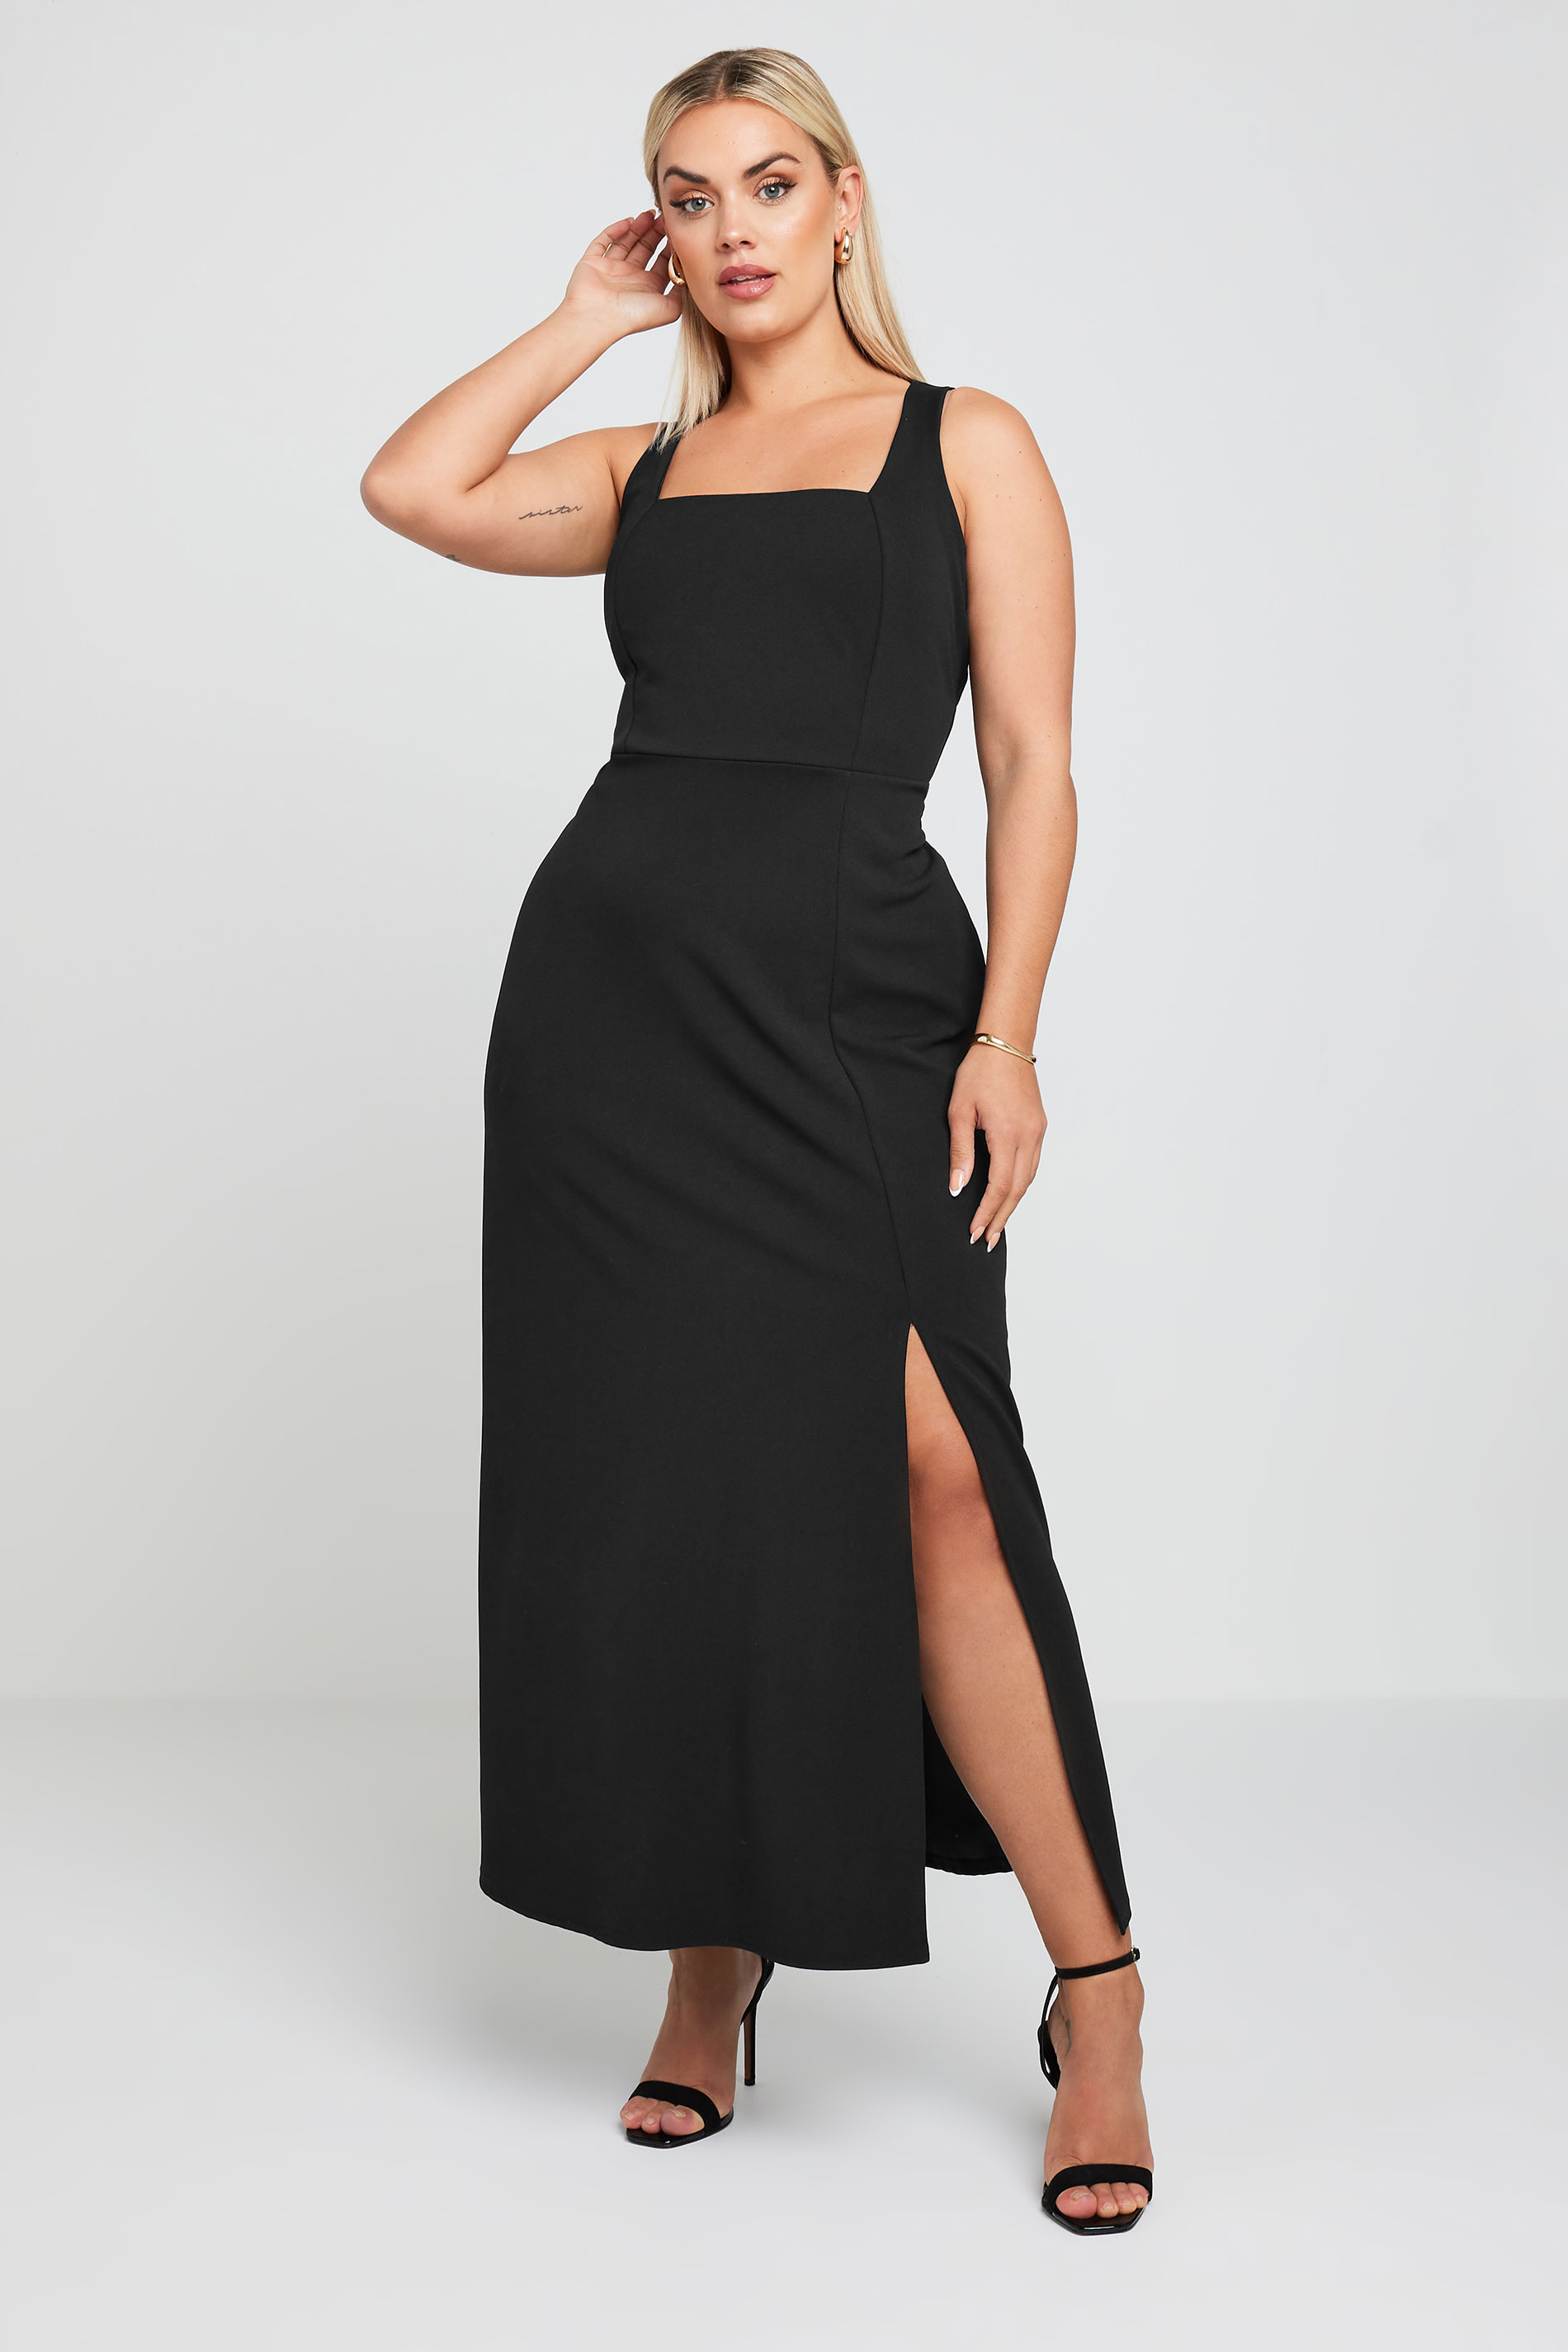 LIMITED COLLECTION Plus Size Black Square Neck Maxi Dress | Yours Clothing 1